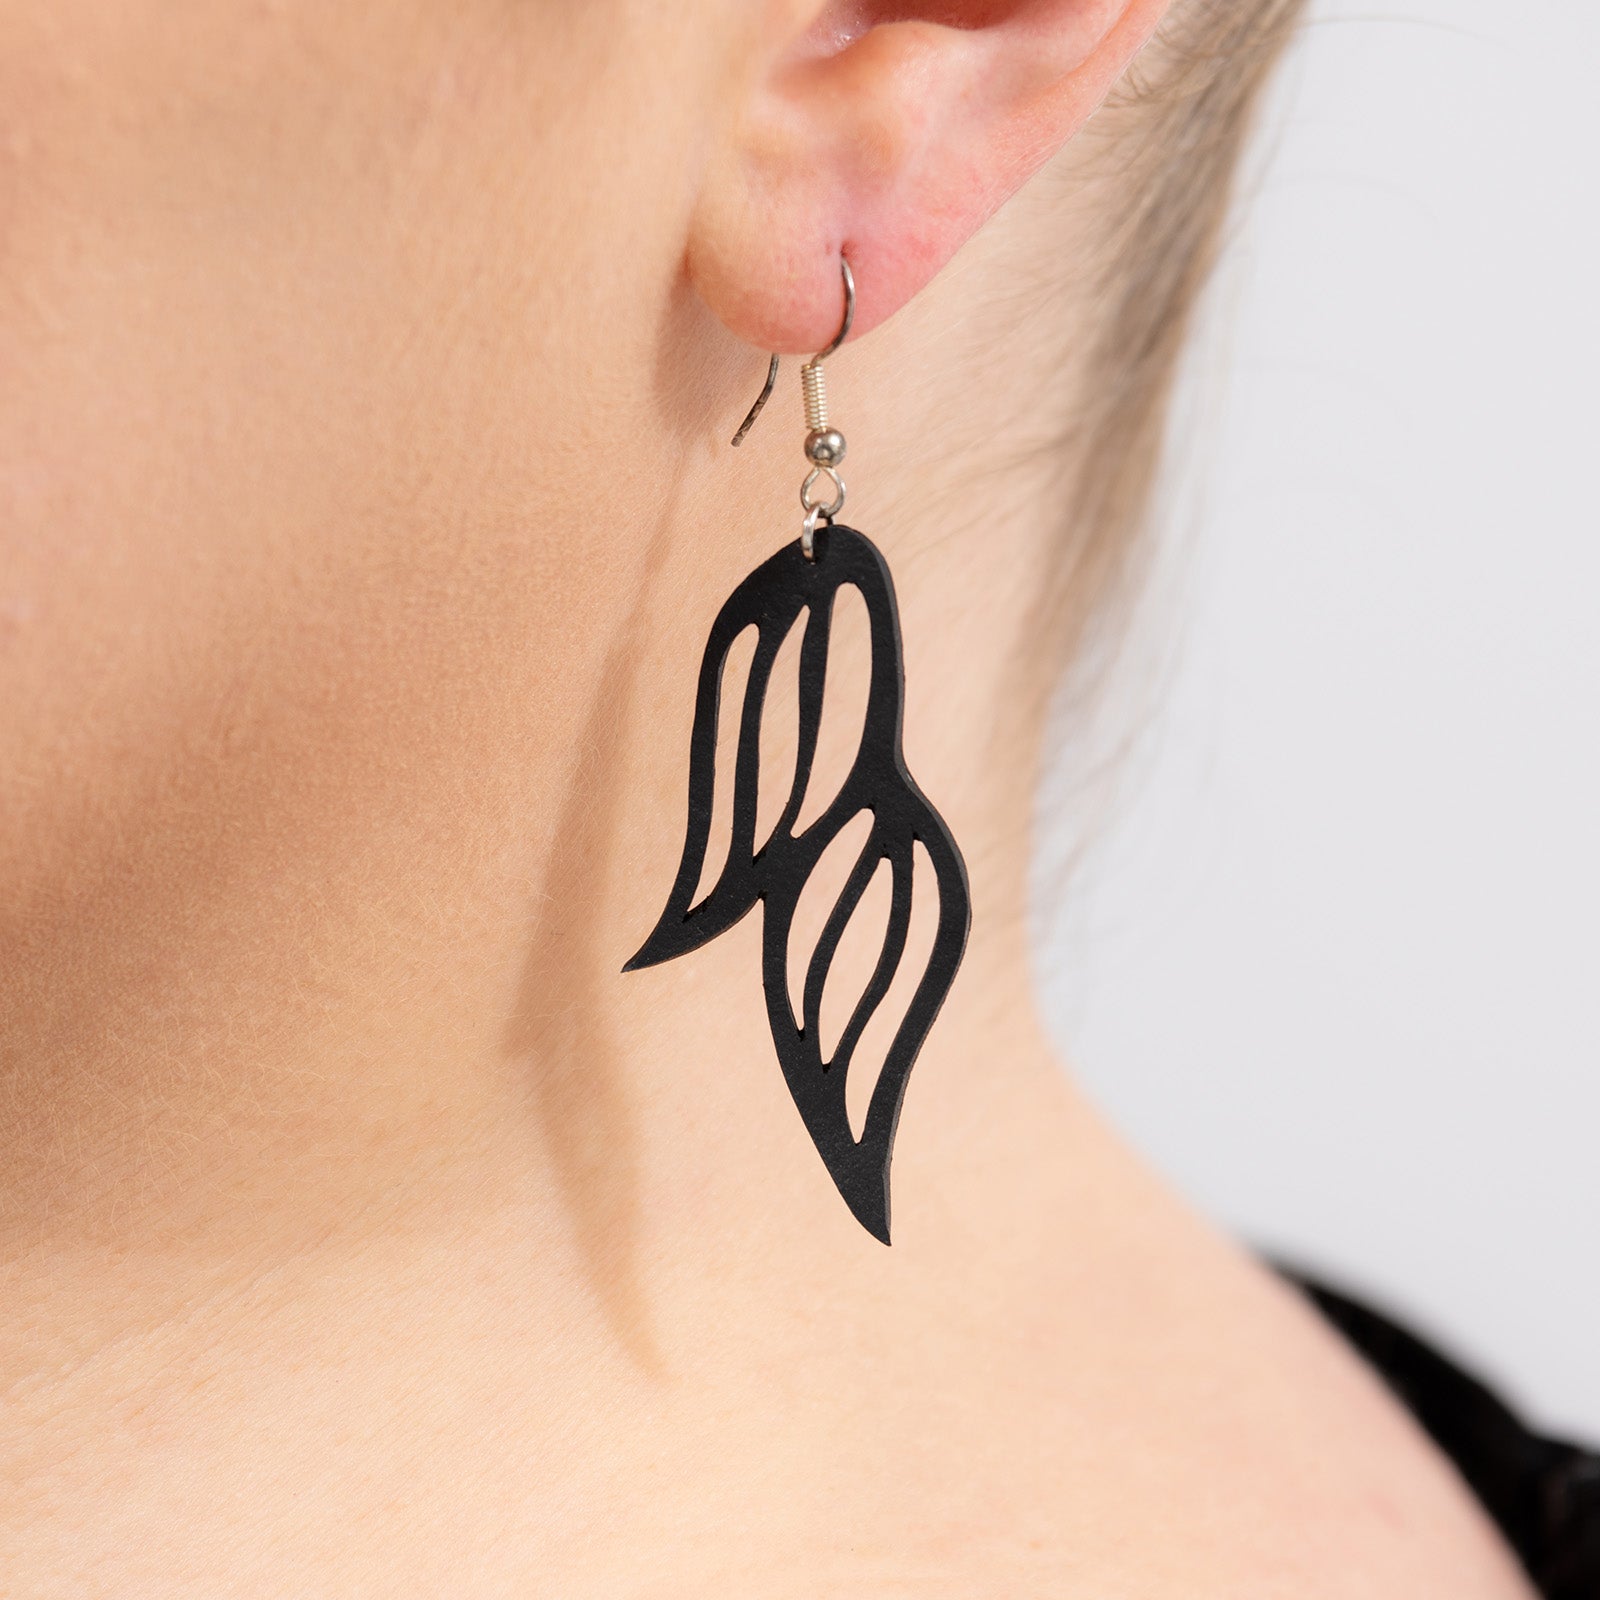 Autumn Recycled Rubber Earrings – Paguro Upcycle